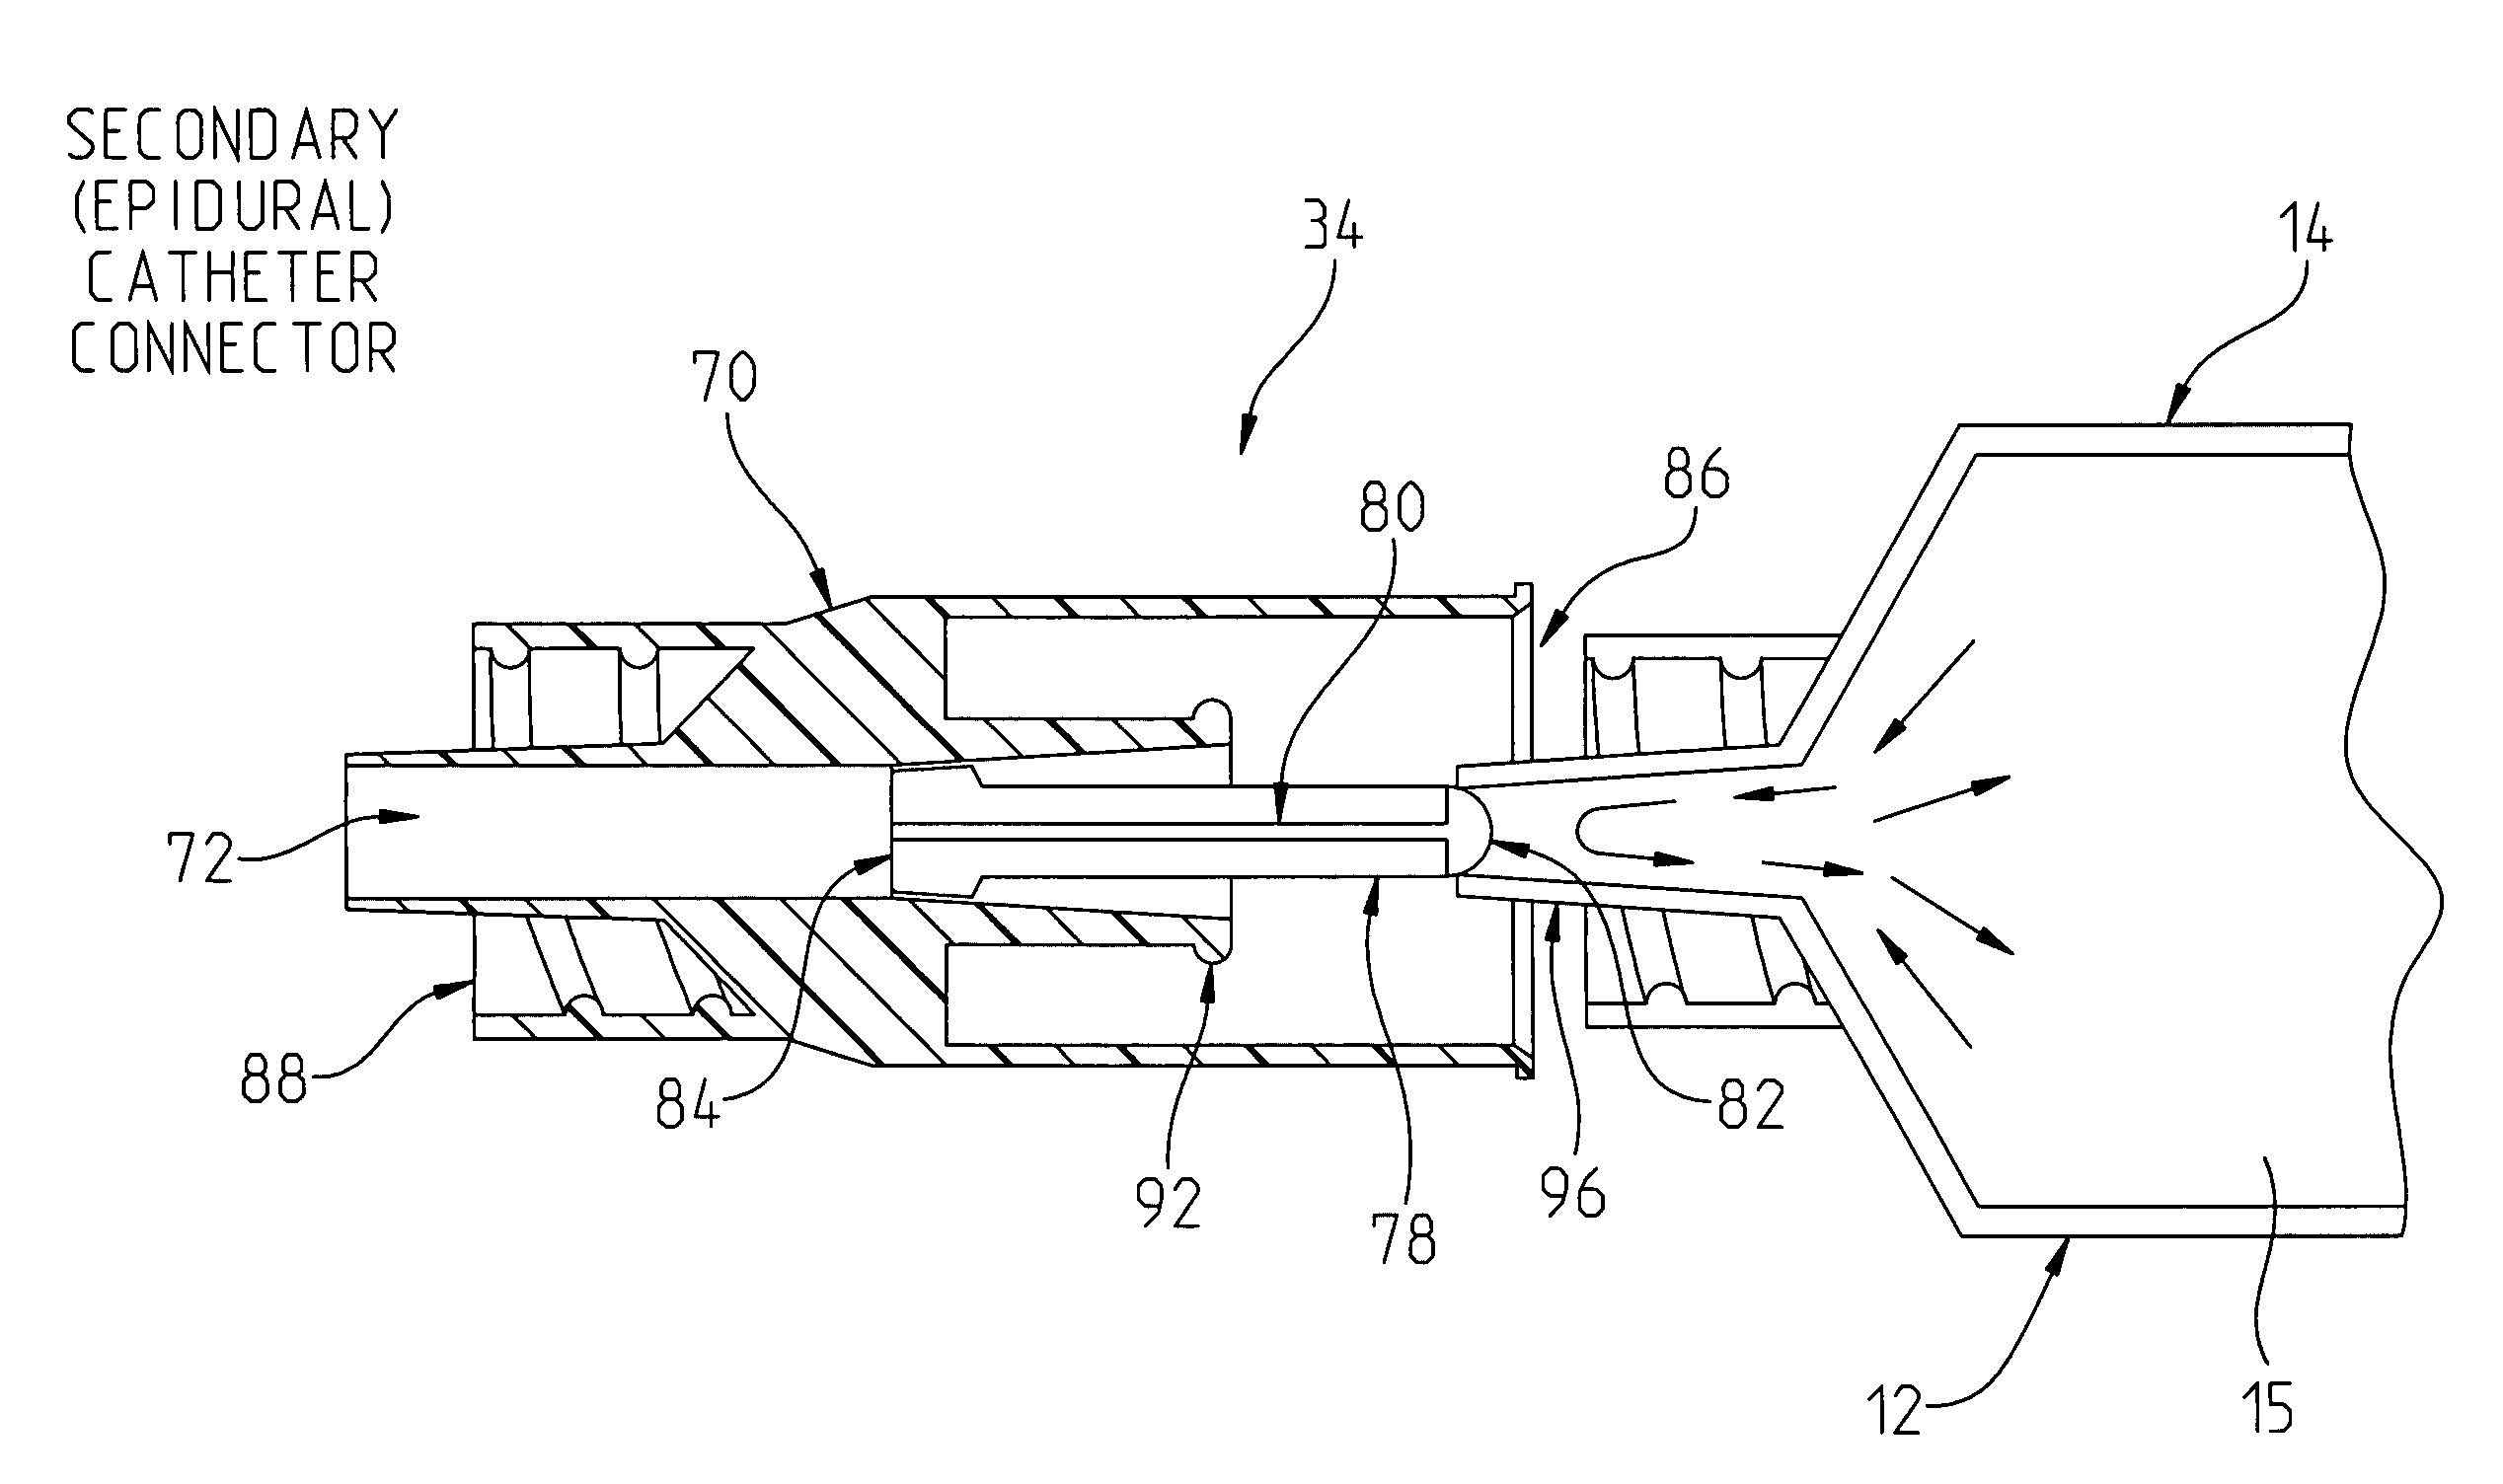 Epidural anesthetic delivery system